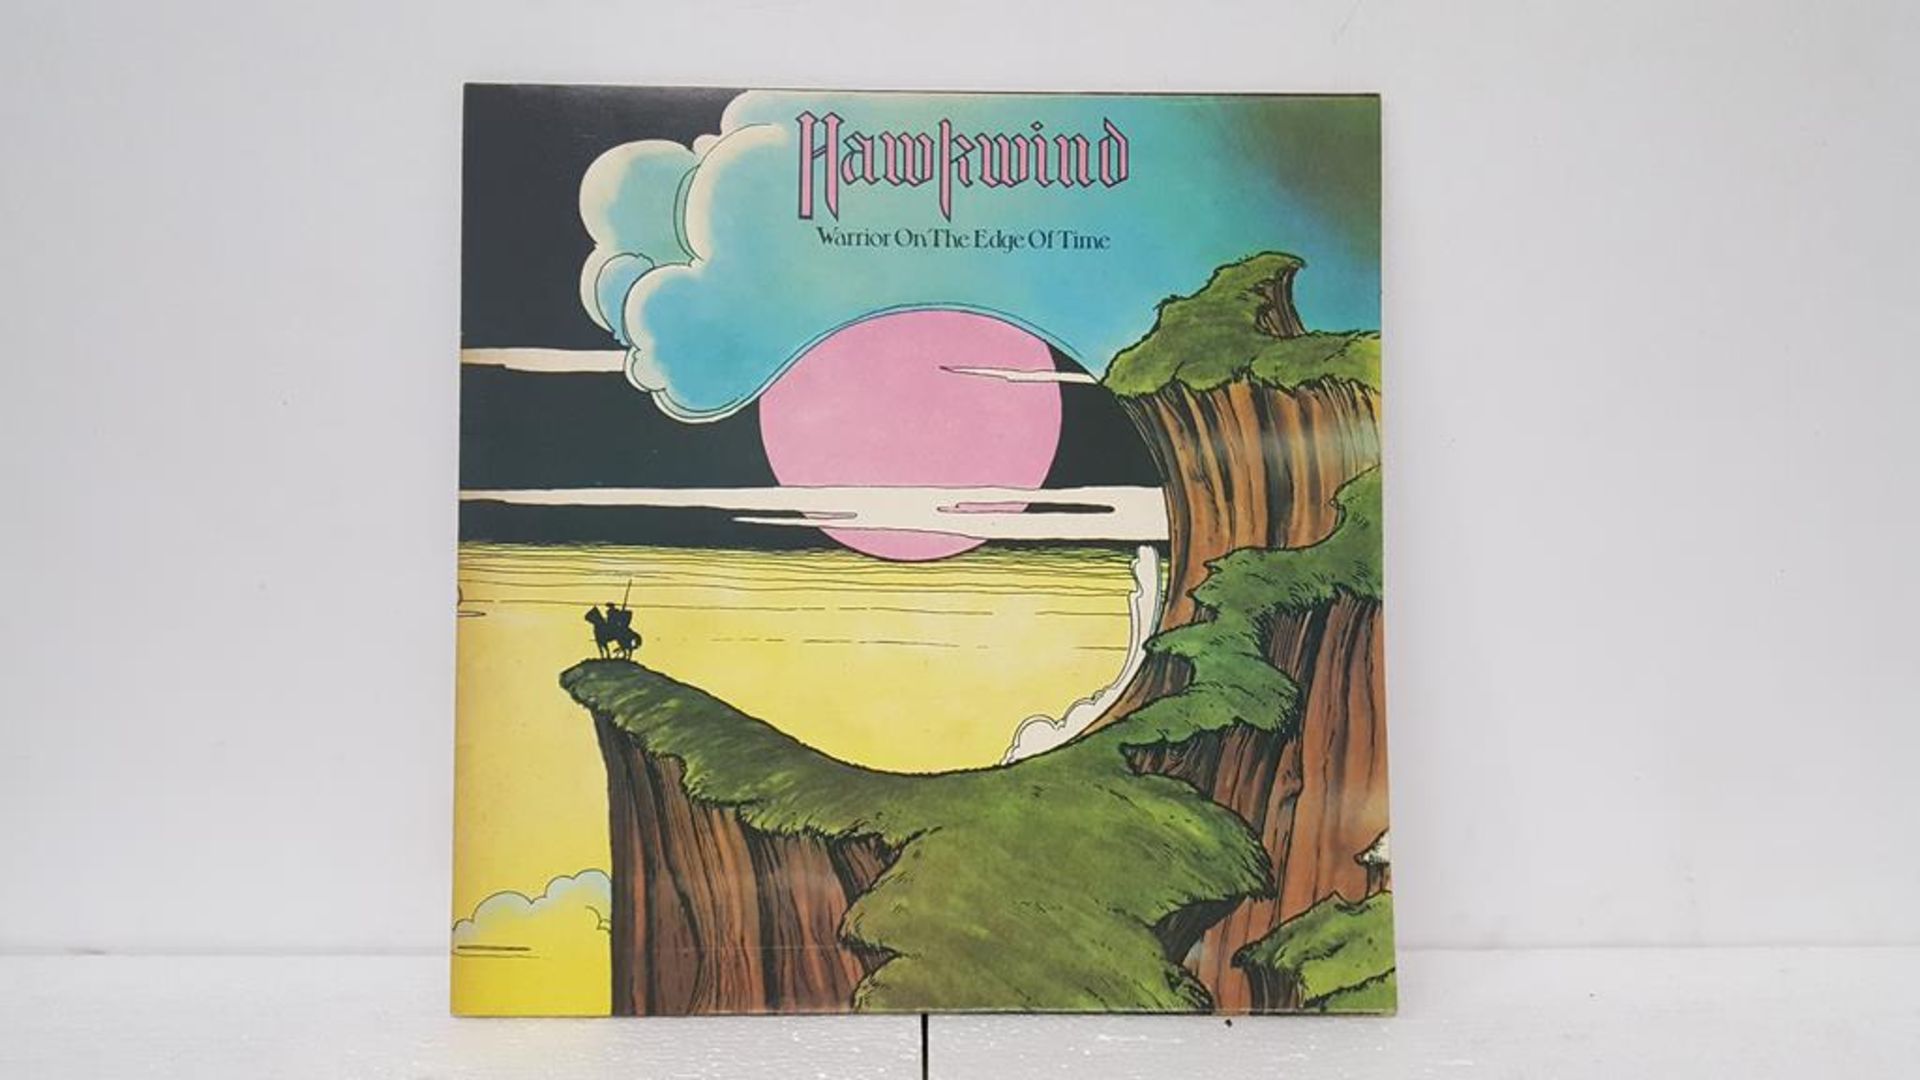 Hawkwind 'Warrior on the Edge of Time' and 'Hawkwind' LPs - Image 2 of 11